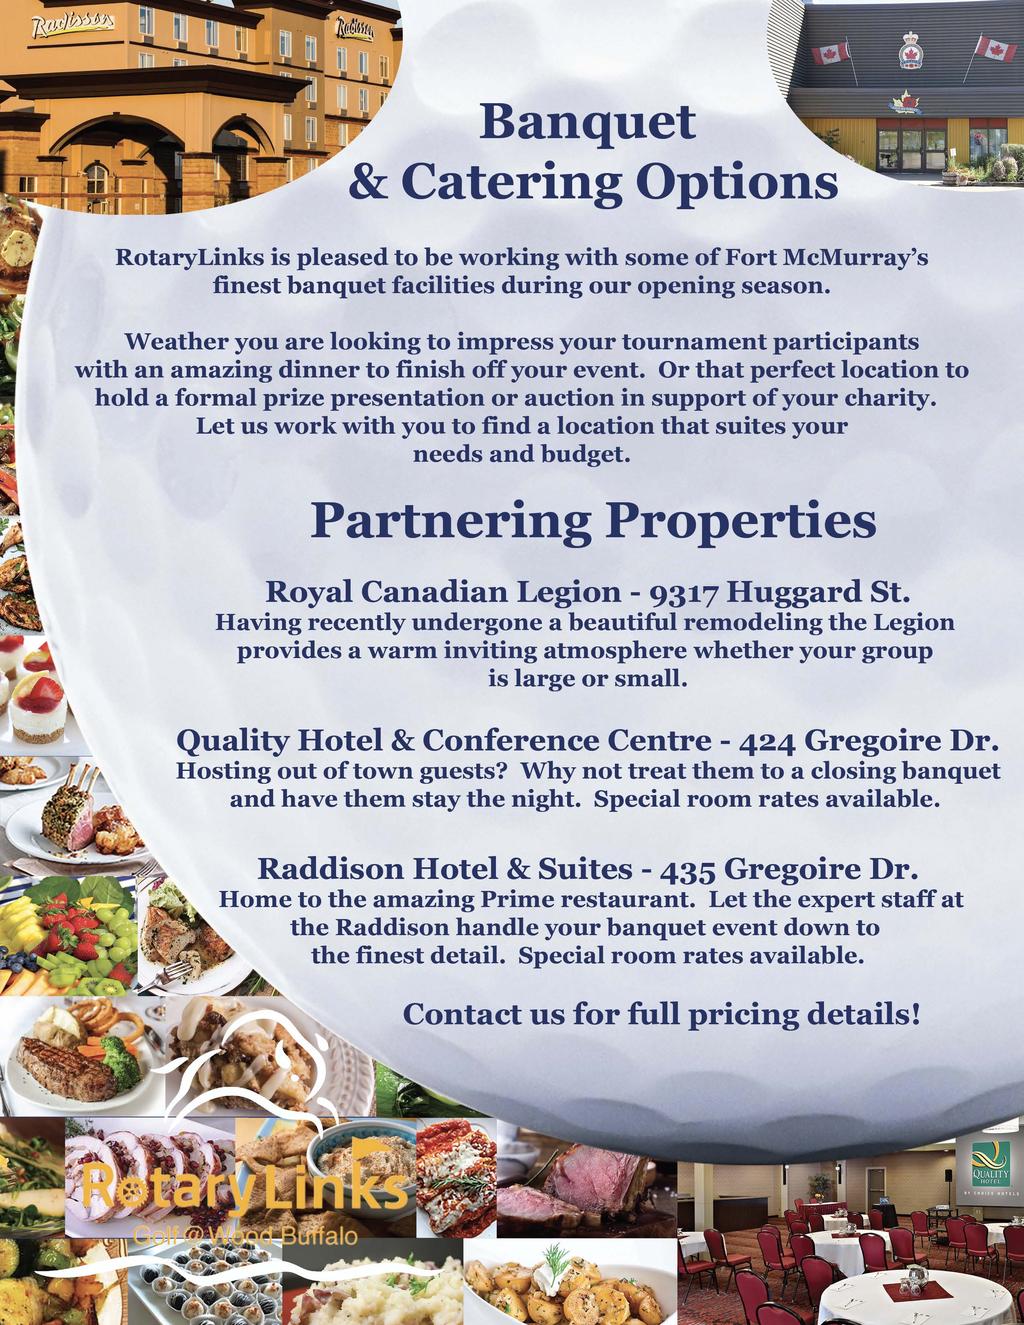 Banquet & Catering Options RotaryLinks is pleased to be working with some of Fort McMurray's finest banquet facilities during our opening season.